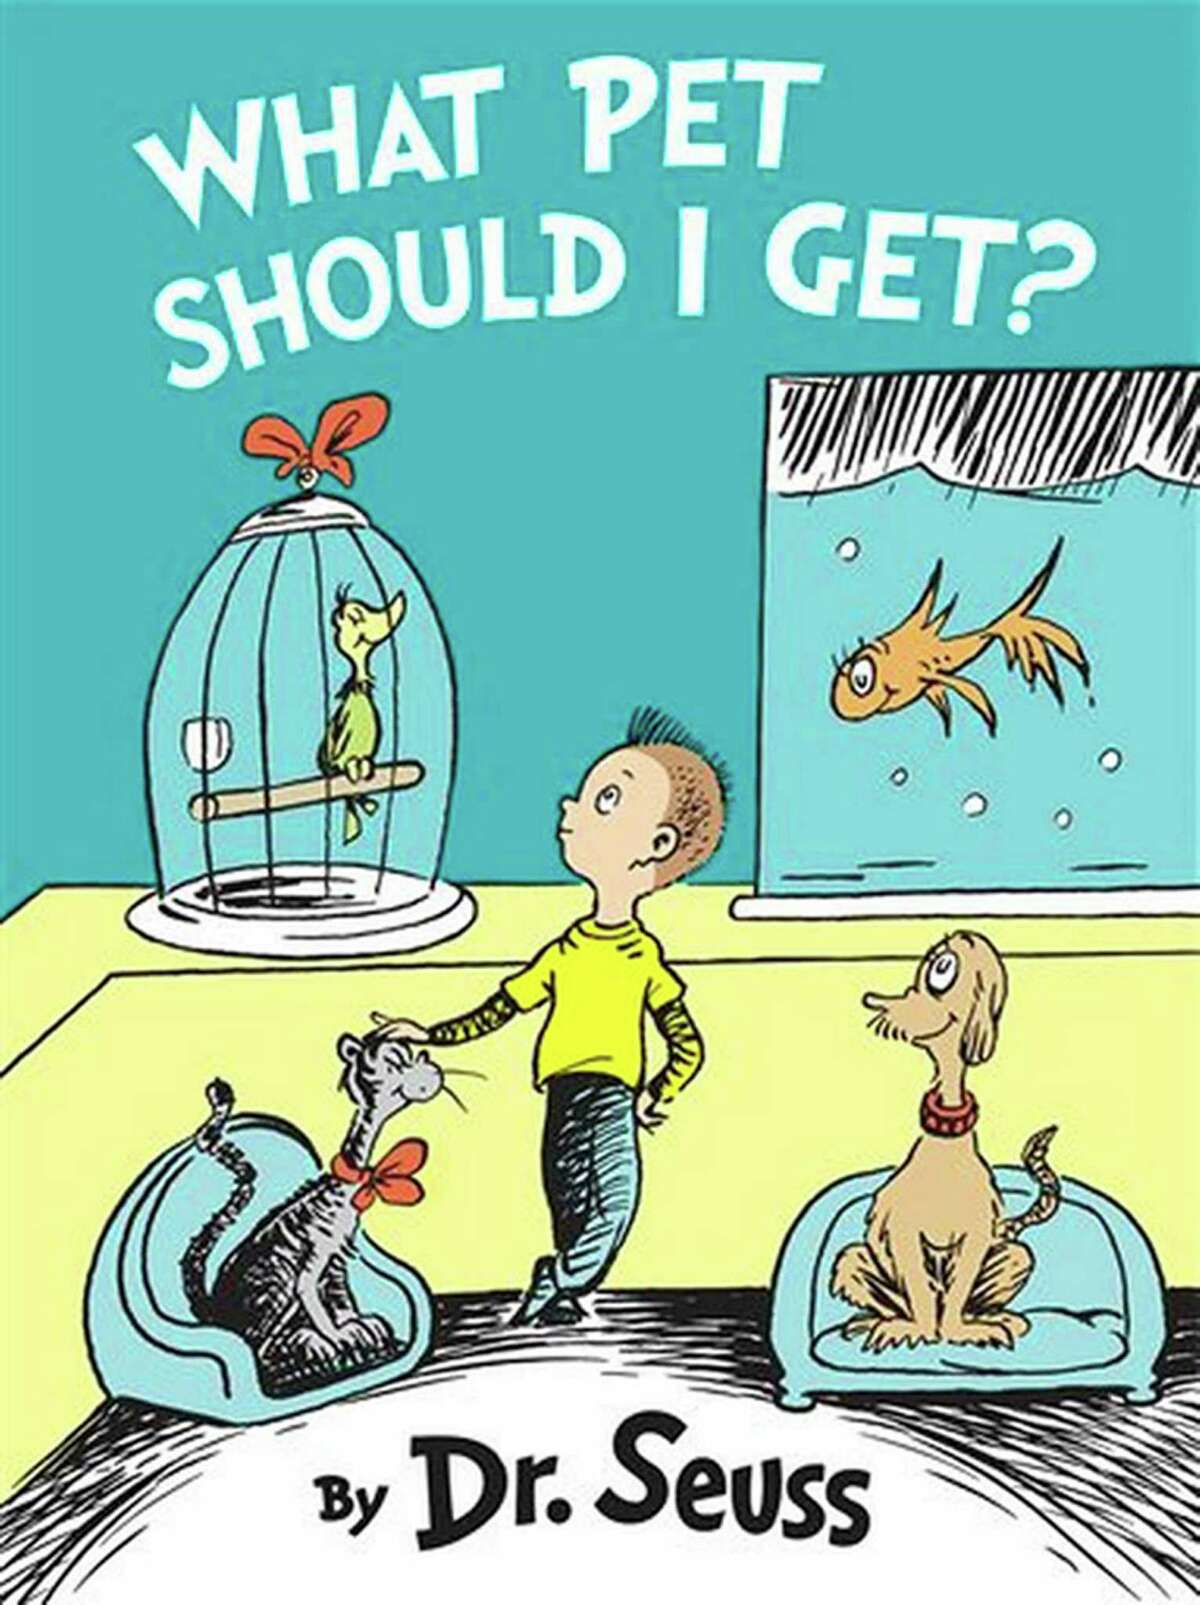 "What Pet Should I Get?" by Dr. Seuss, is coming out July 28. This never-before-seen book will be celebrated on its release day at the Barnes and Noble bookstore in Danbury. The event, which begins at 7 p.m., is part of the store's Dr. Seuss Spectacular, which continues on July 31. (Handout/TNS)